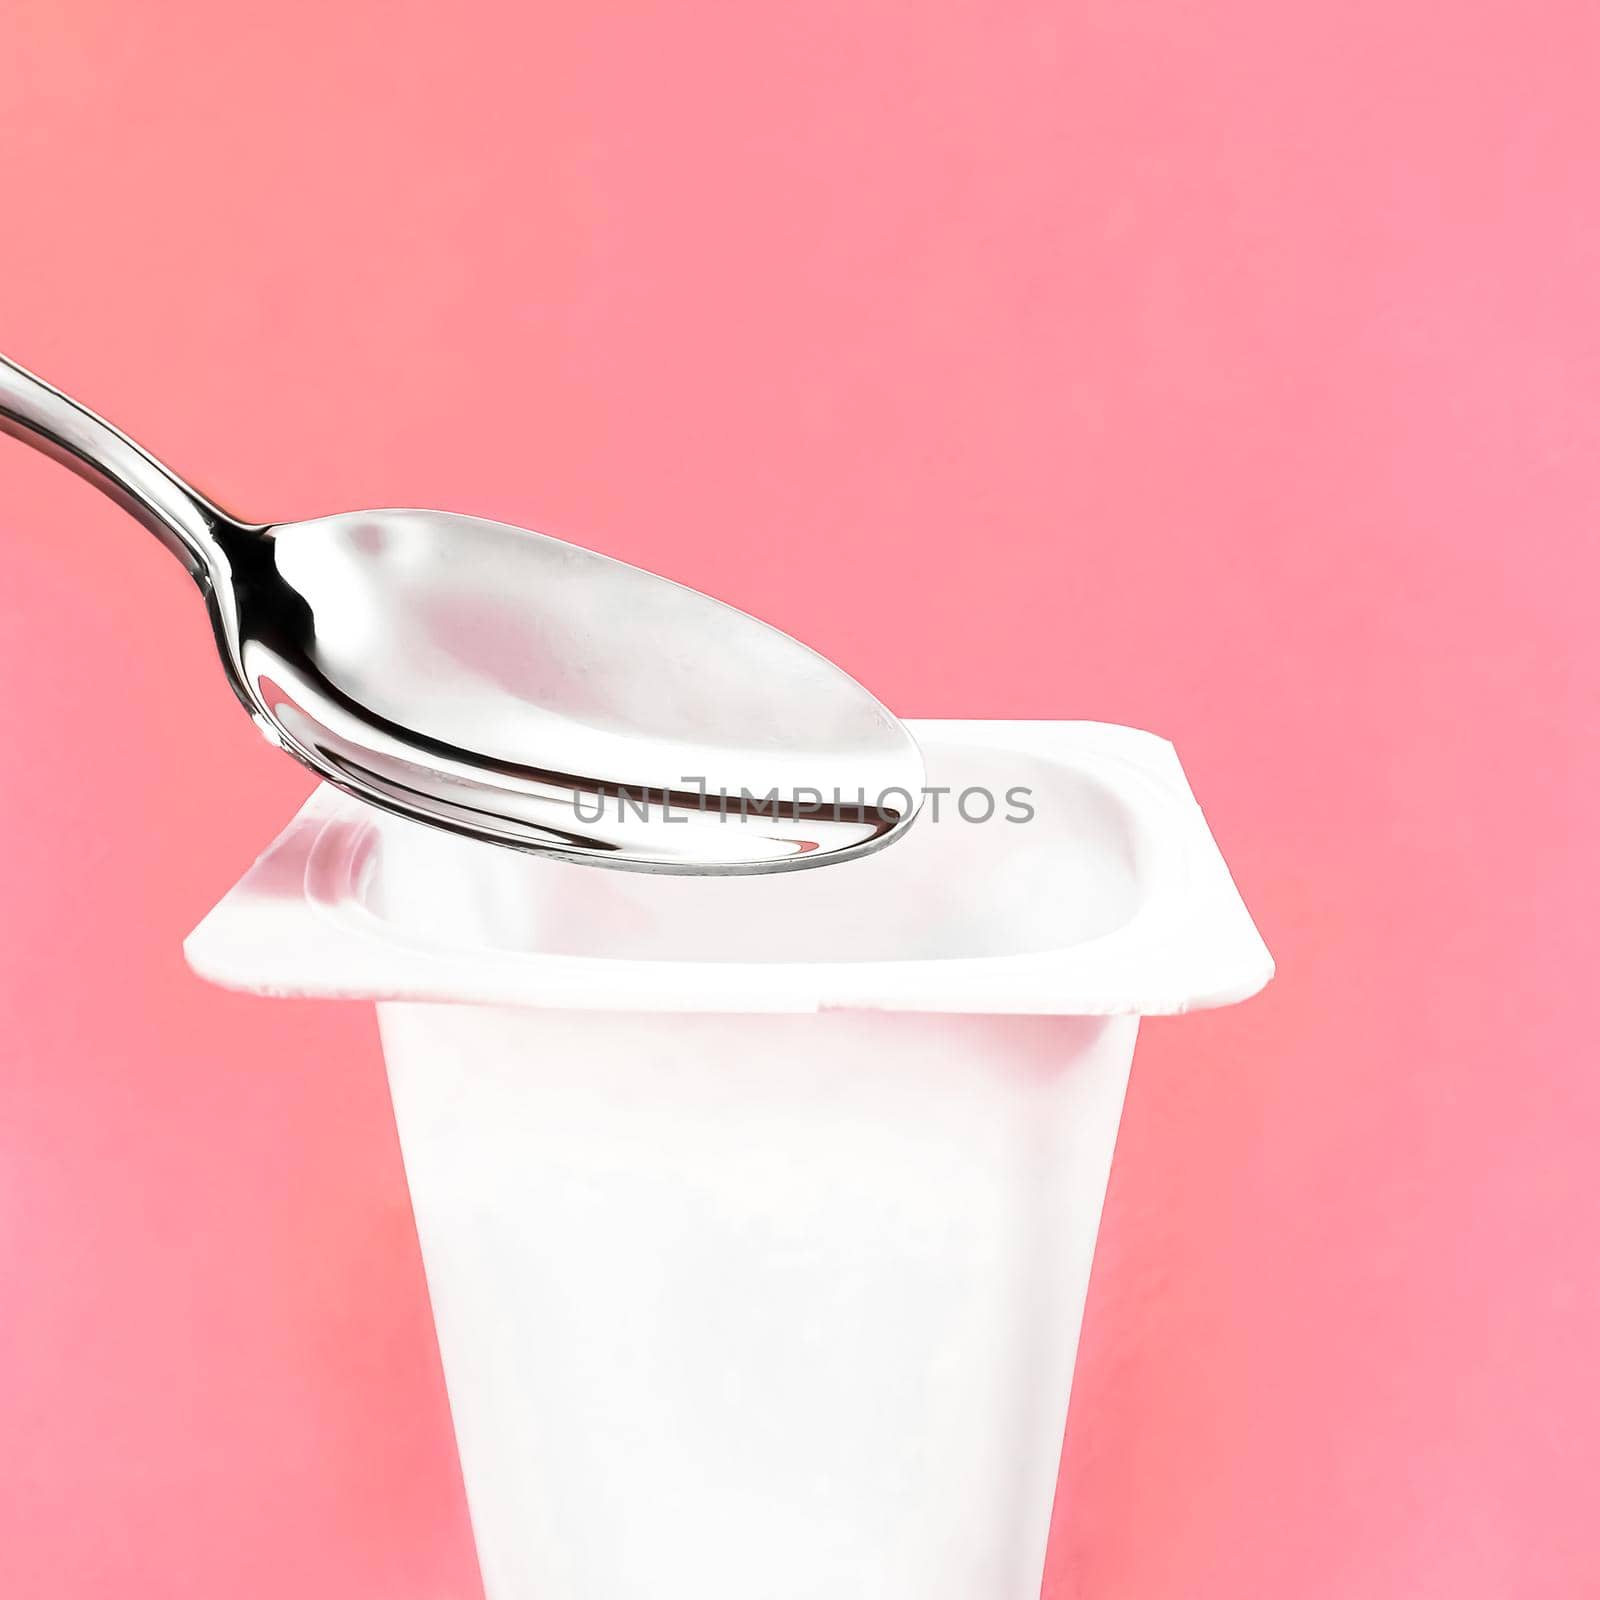 Yogurt cup and silver spoon on pink background, white plastic container with yoghurt cream, fresh dairy product for healthy diet and nutrition balance.